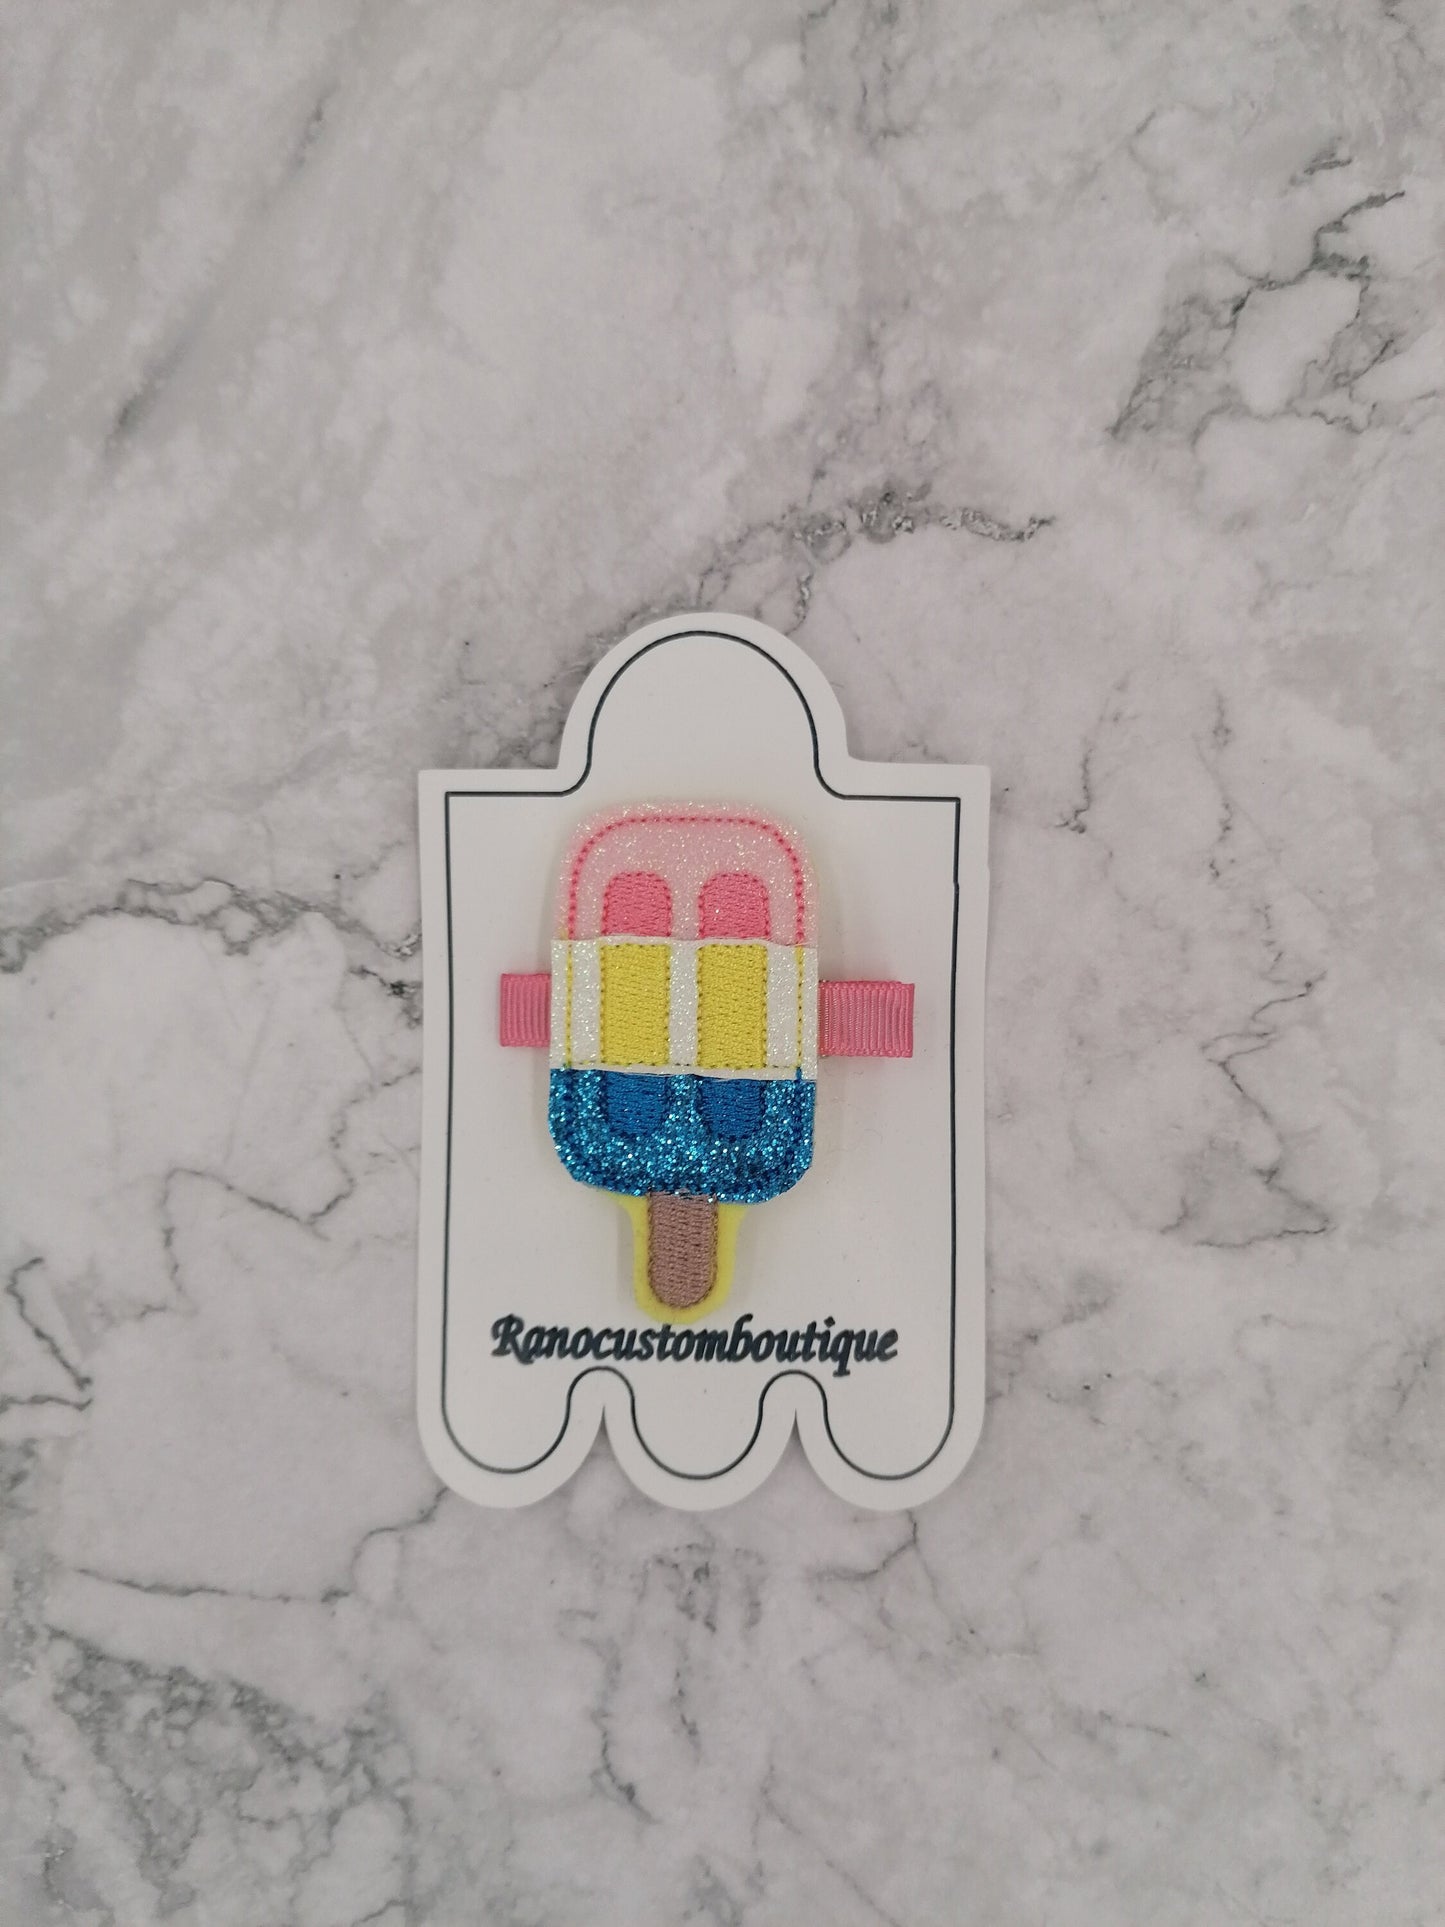 Embroidered Felt Hair Clip, Ice Lolly Design, Ice Lolly Hair Clip, Children's Hair Clip, Children's Accessories, Hair Accessories